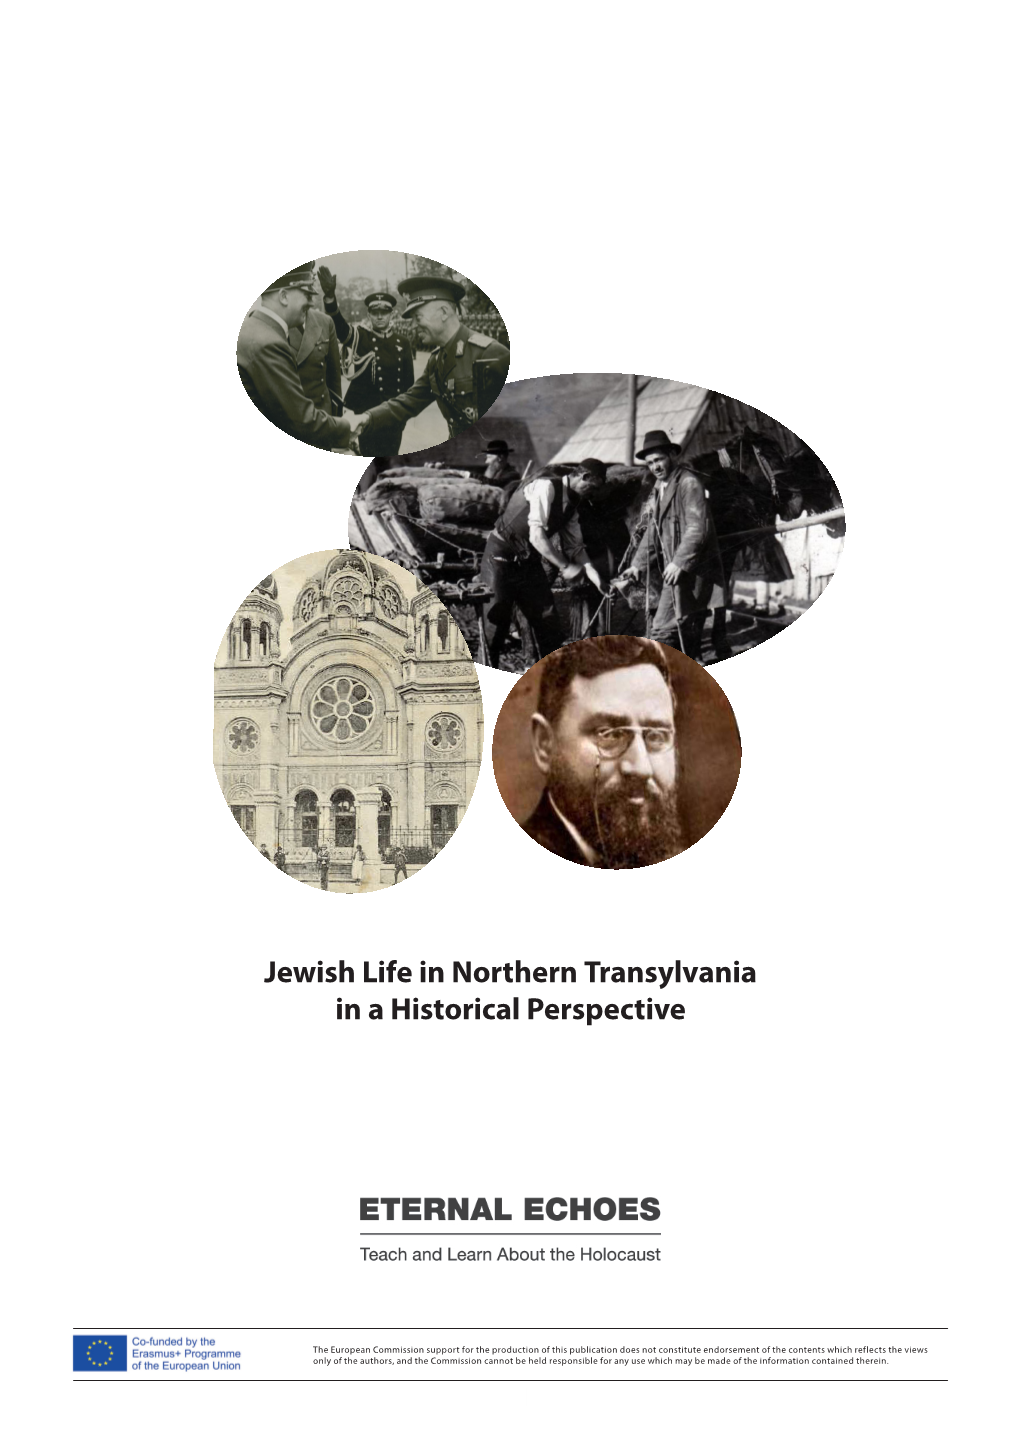 Jewish Life in Northern Transylvania in a Historical Perspective